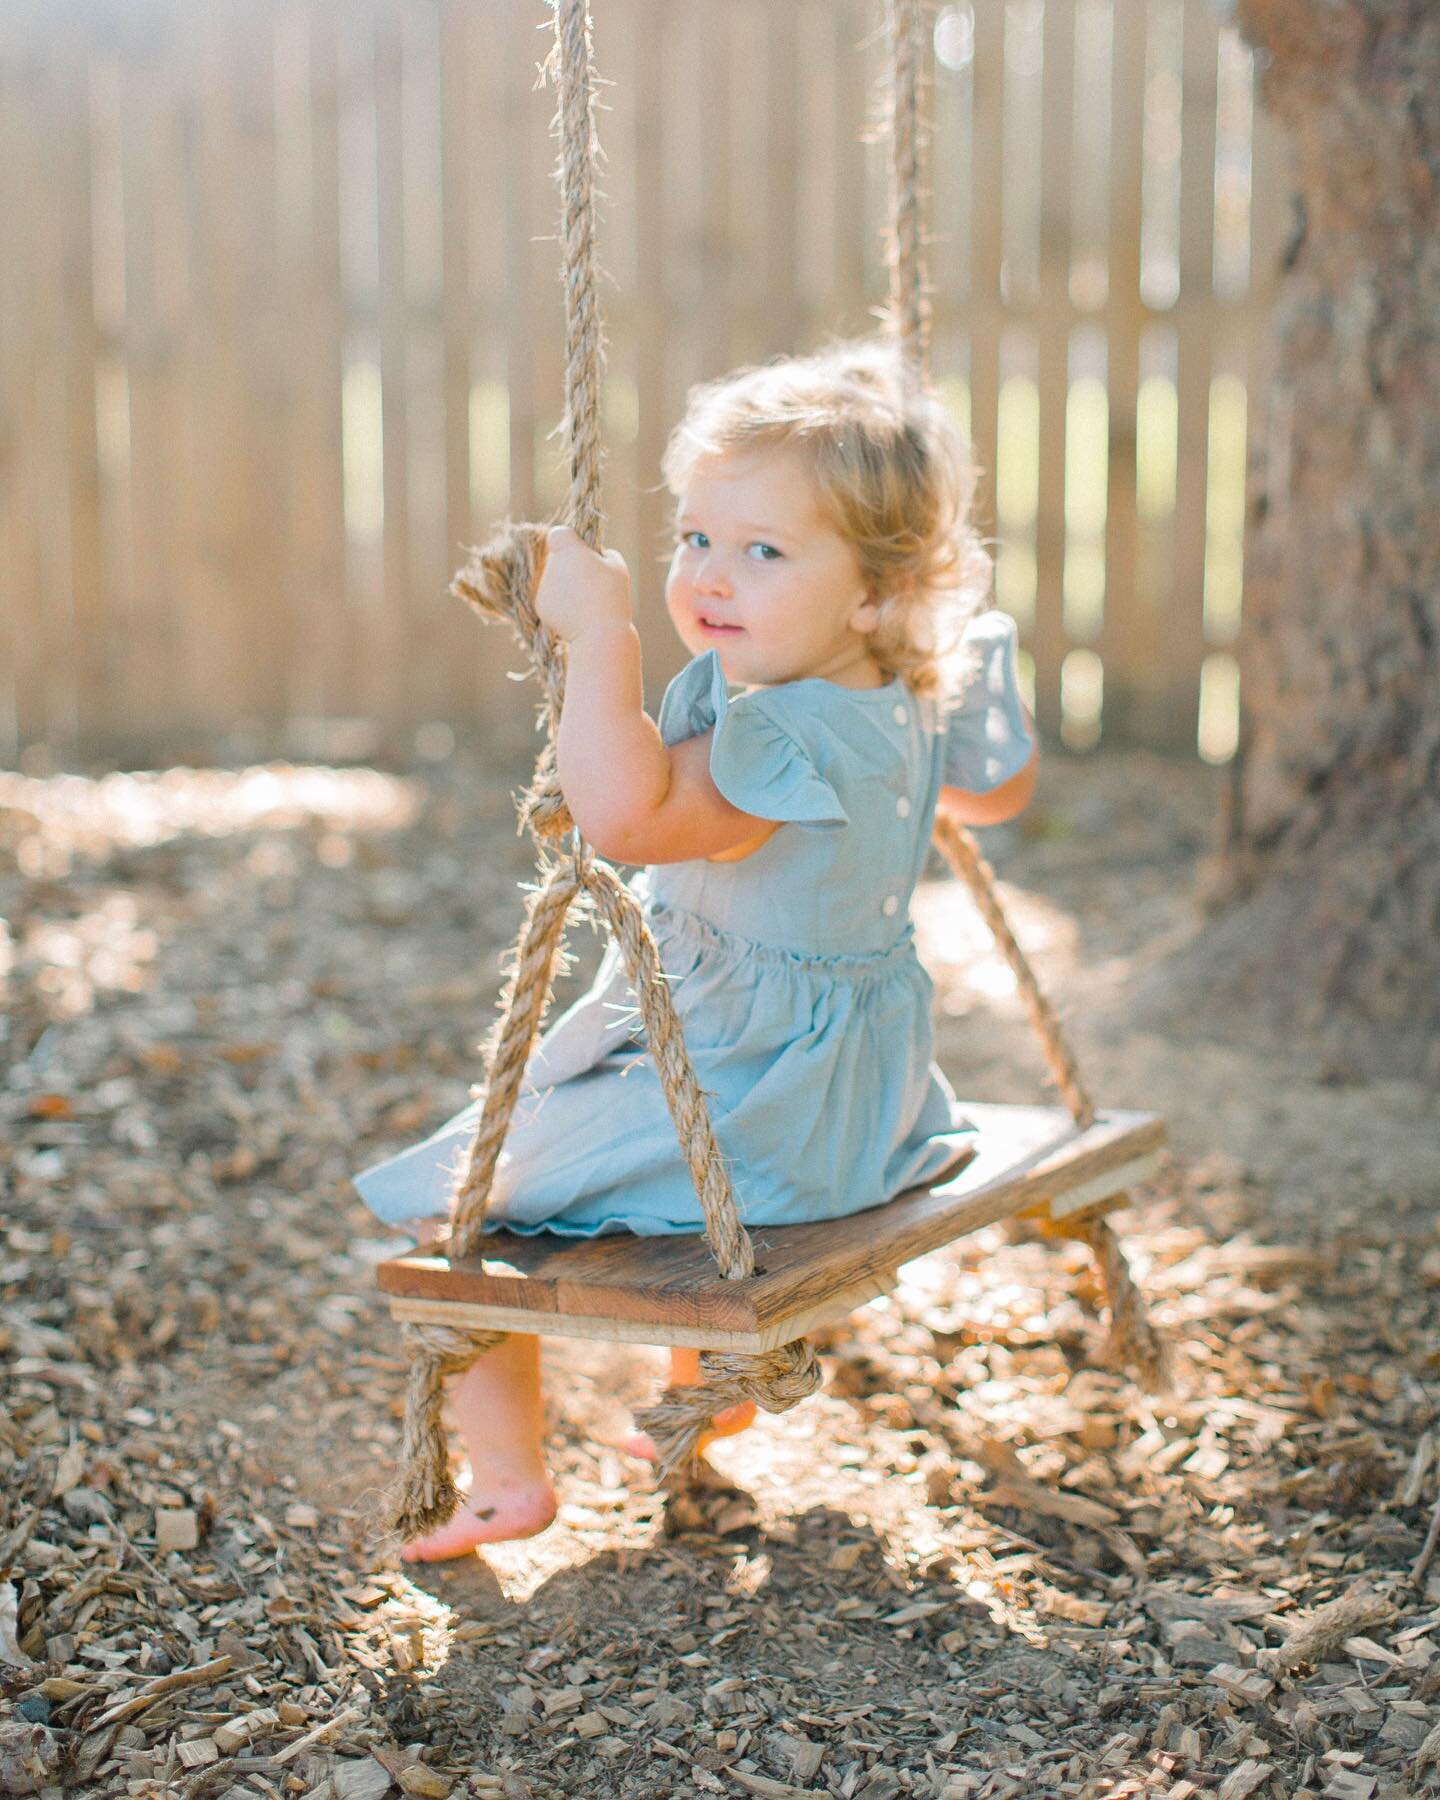 The sweetest little backyard swing for this new big sister.

#babyphotography #dephotographer #abigailjill #family #familyphotographer #pafamilyphotographer #defamilyphotographer #justgoshoot #defamilyphotography #njfamilyphotographer #paphotographer